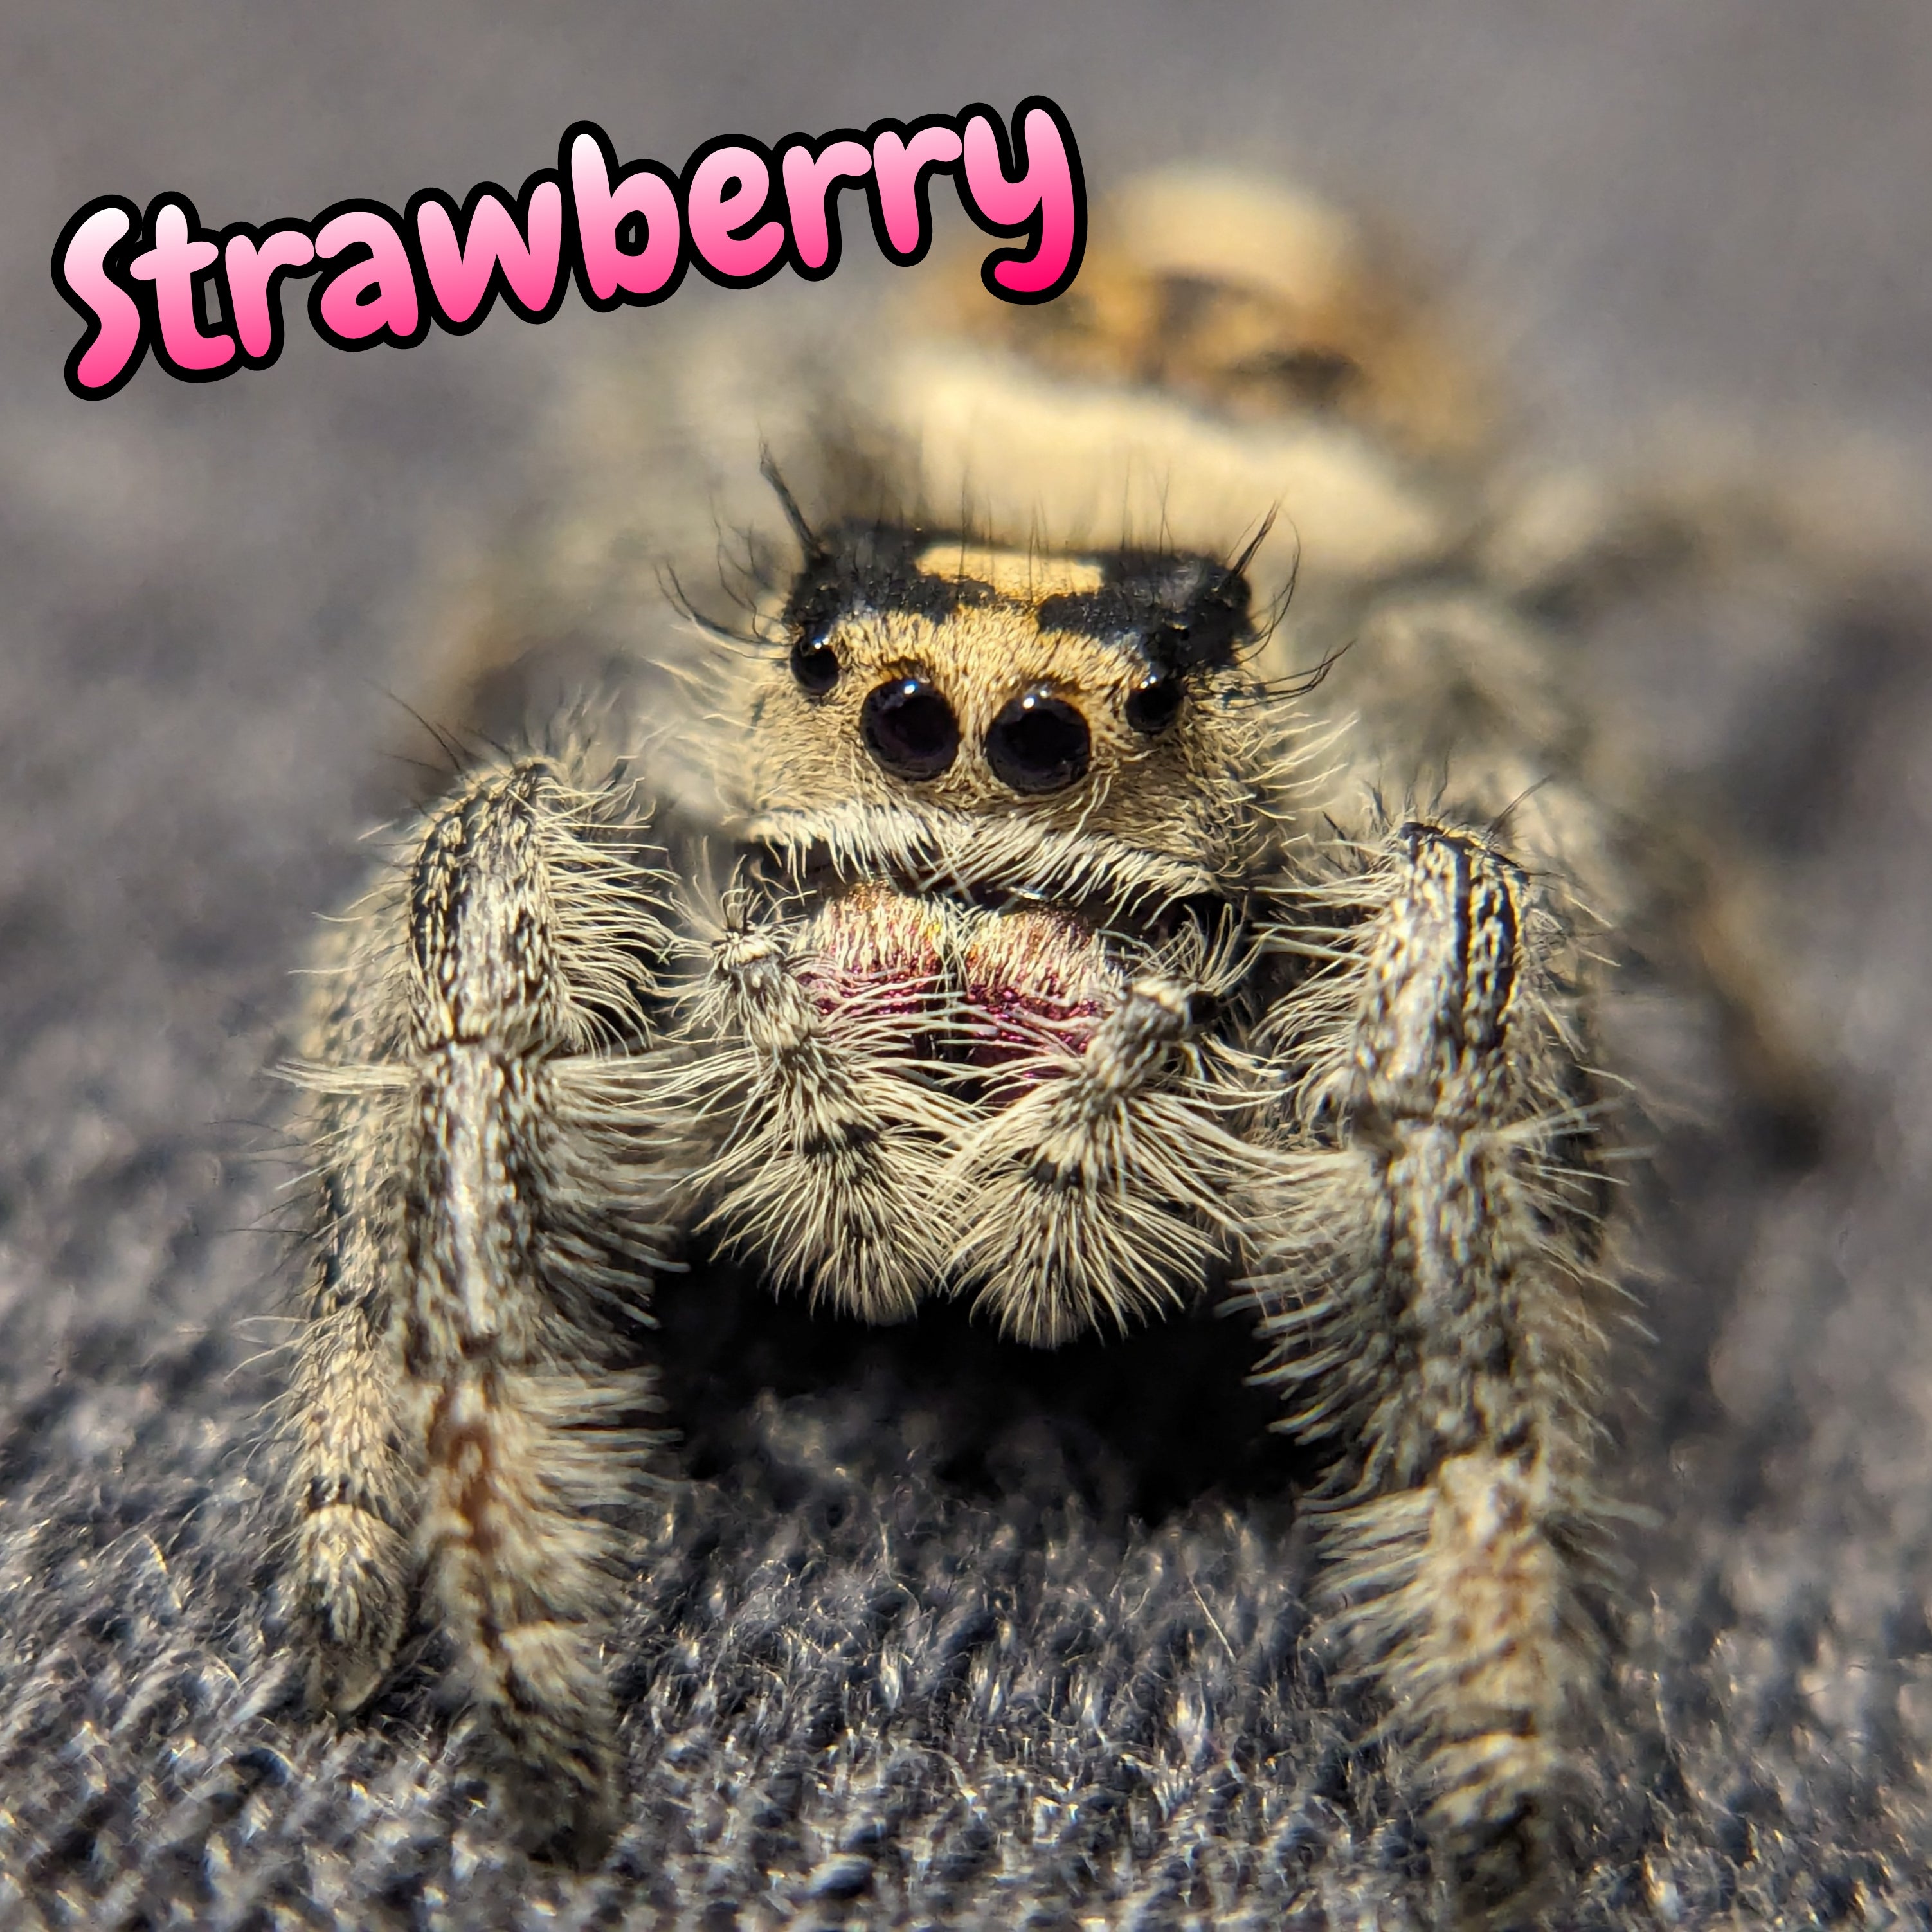 Regal Jumping Spider "Strawberry"